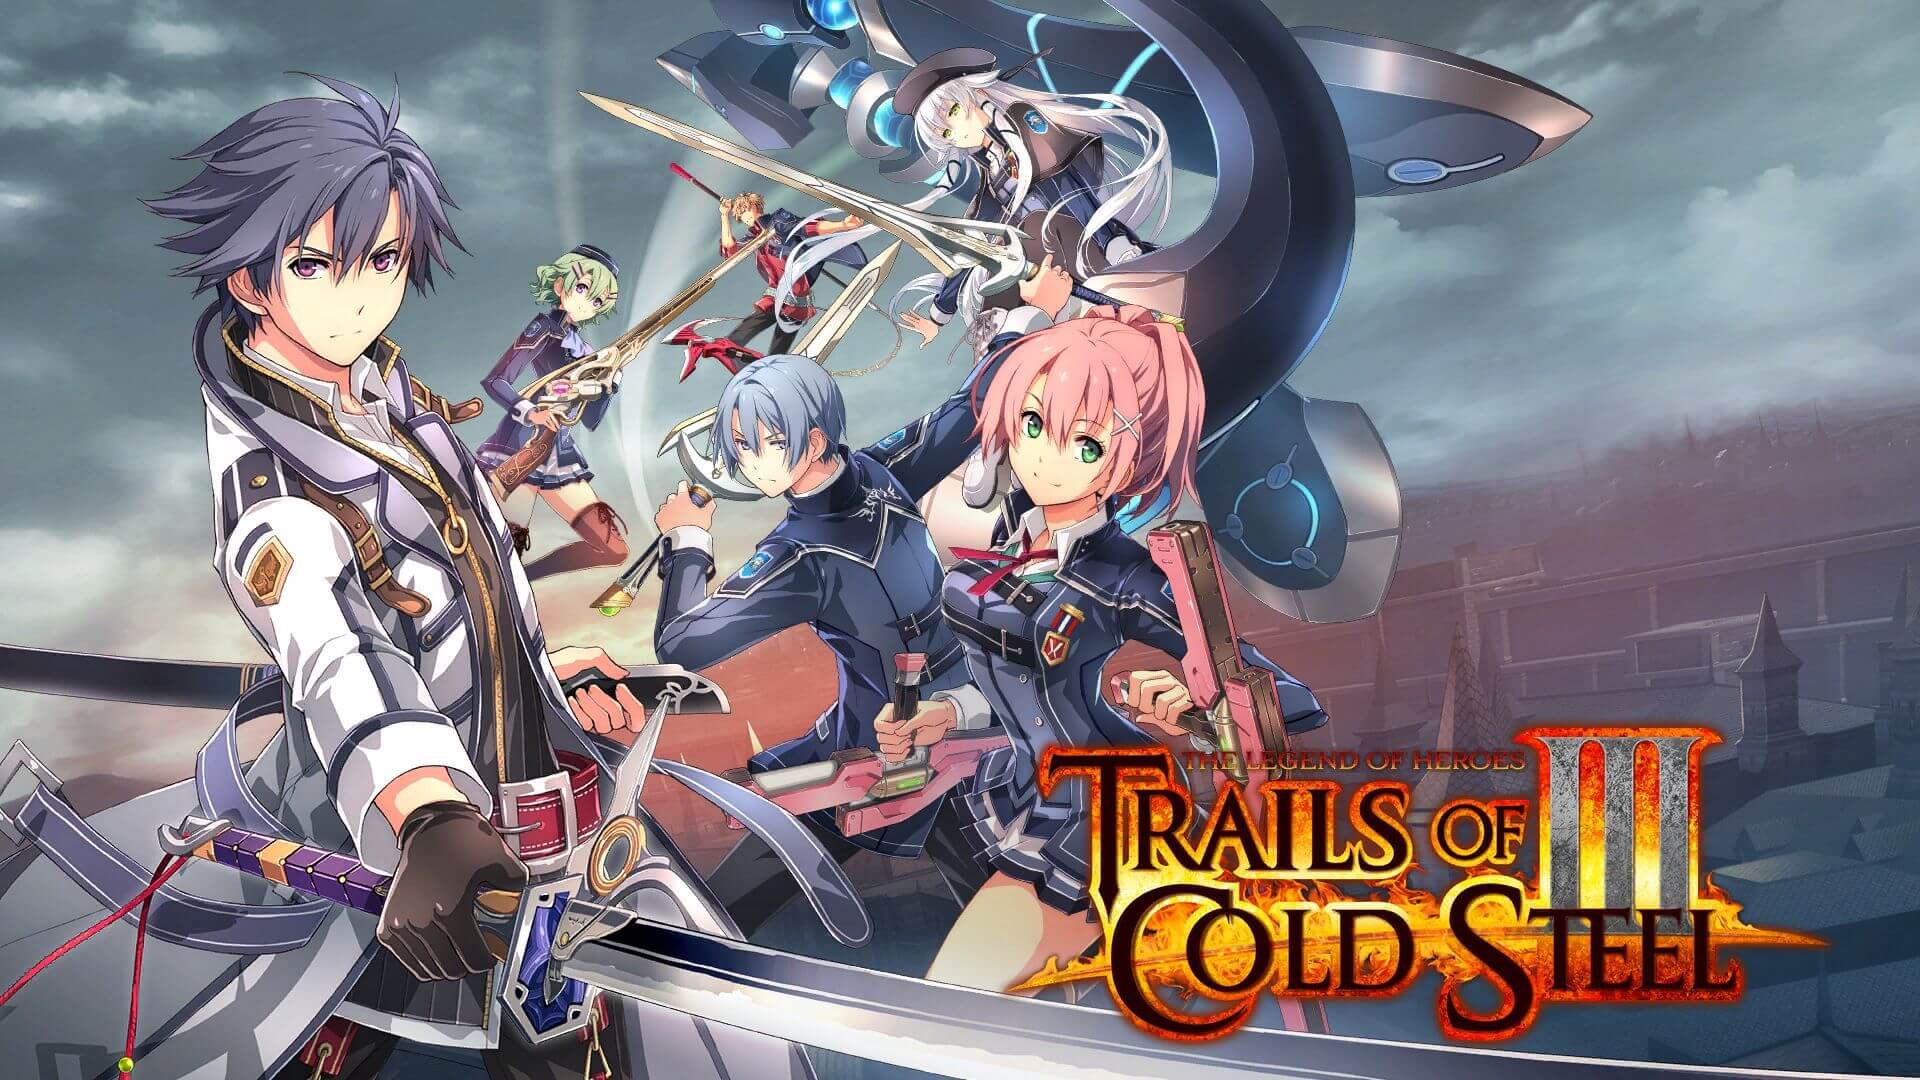 The Legend of Heroes: Trails of Cold Steel III Free PC Download